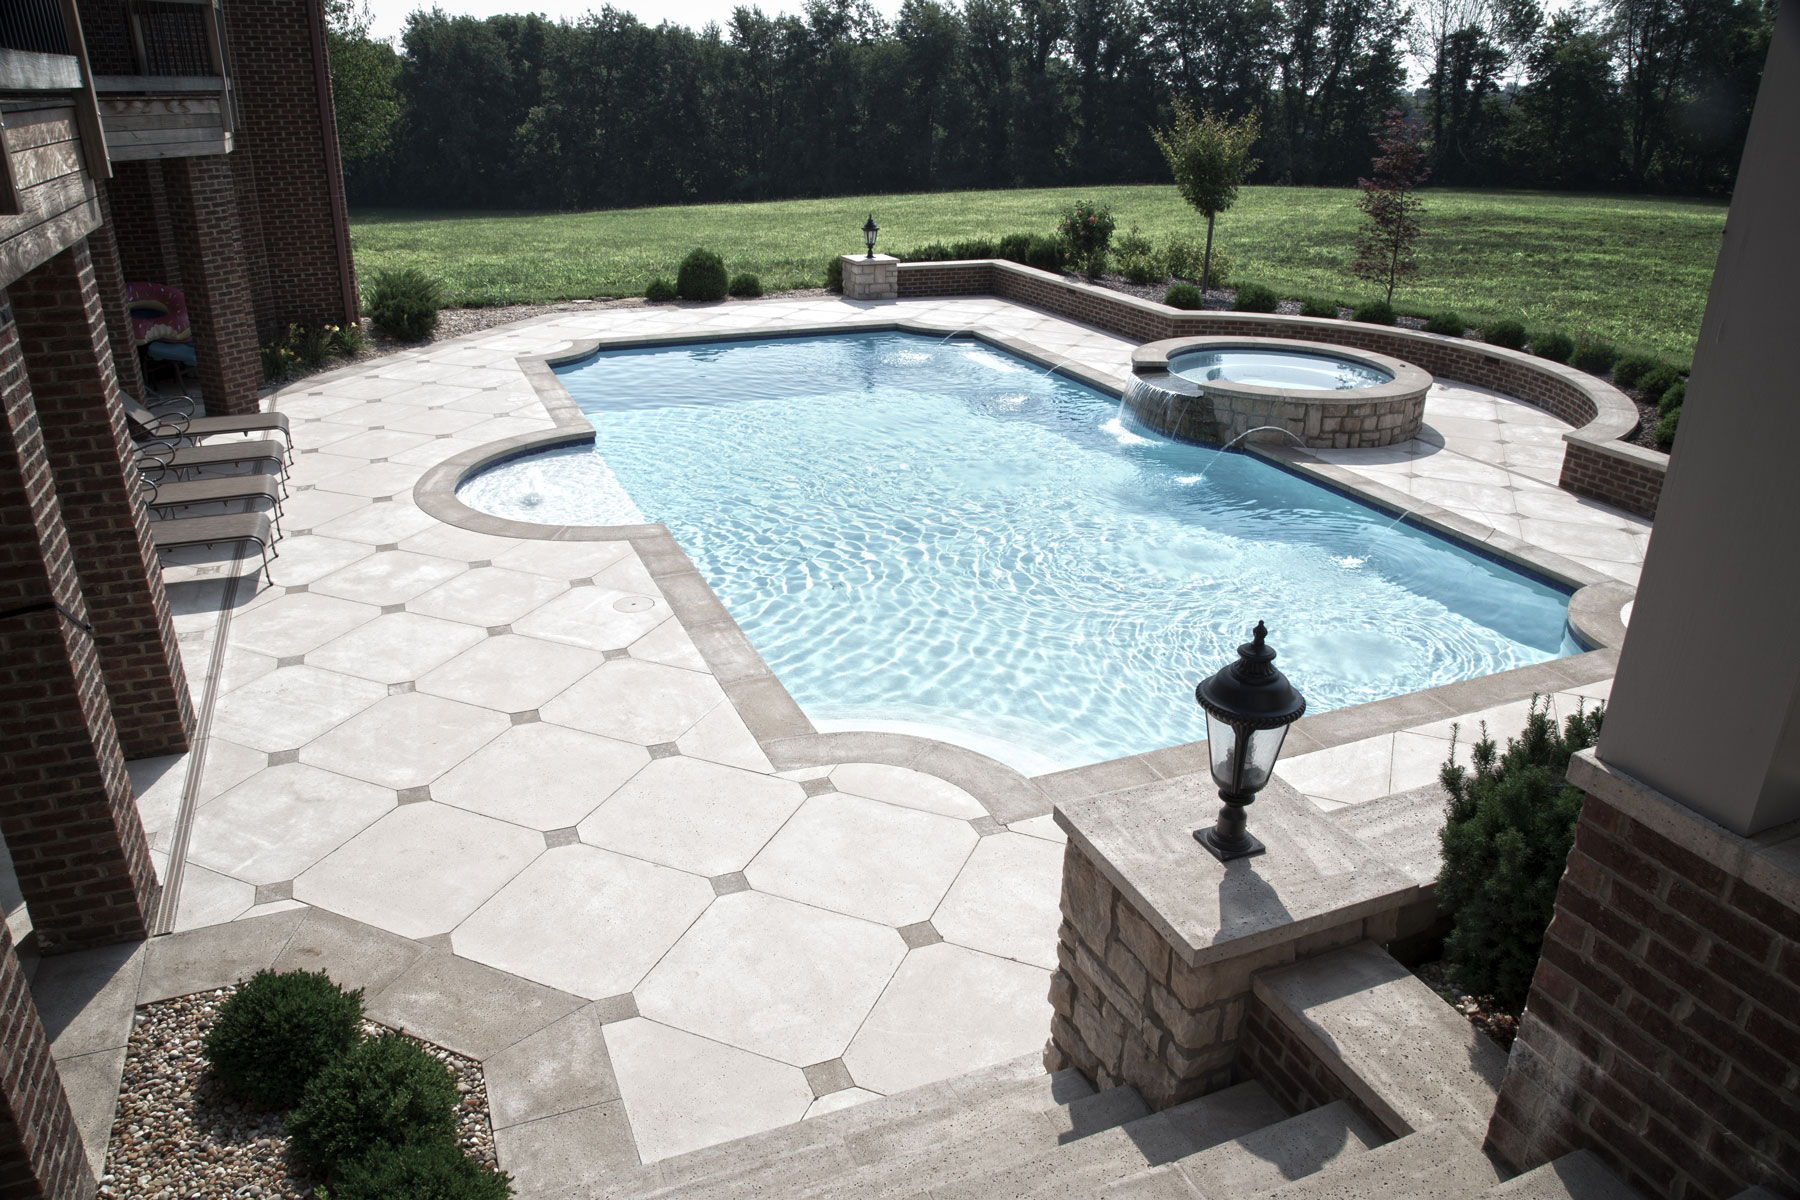 The pool coping tiles follow the unique shape of the water feature, offset by the rectangle deck pavers